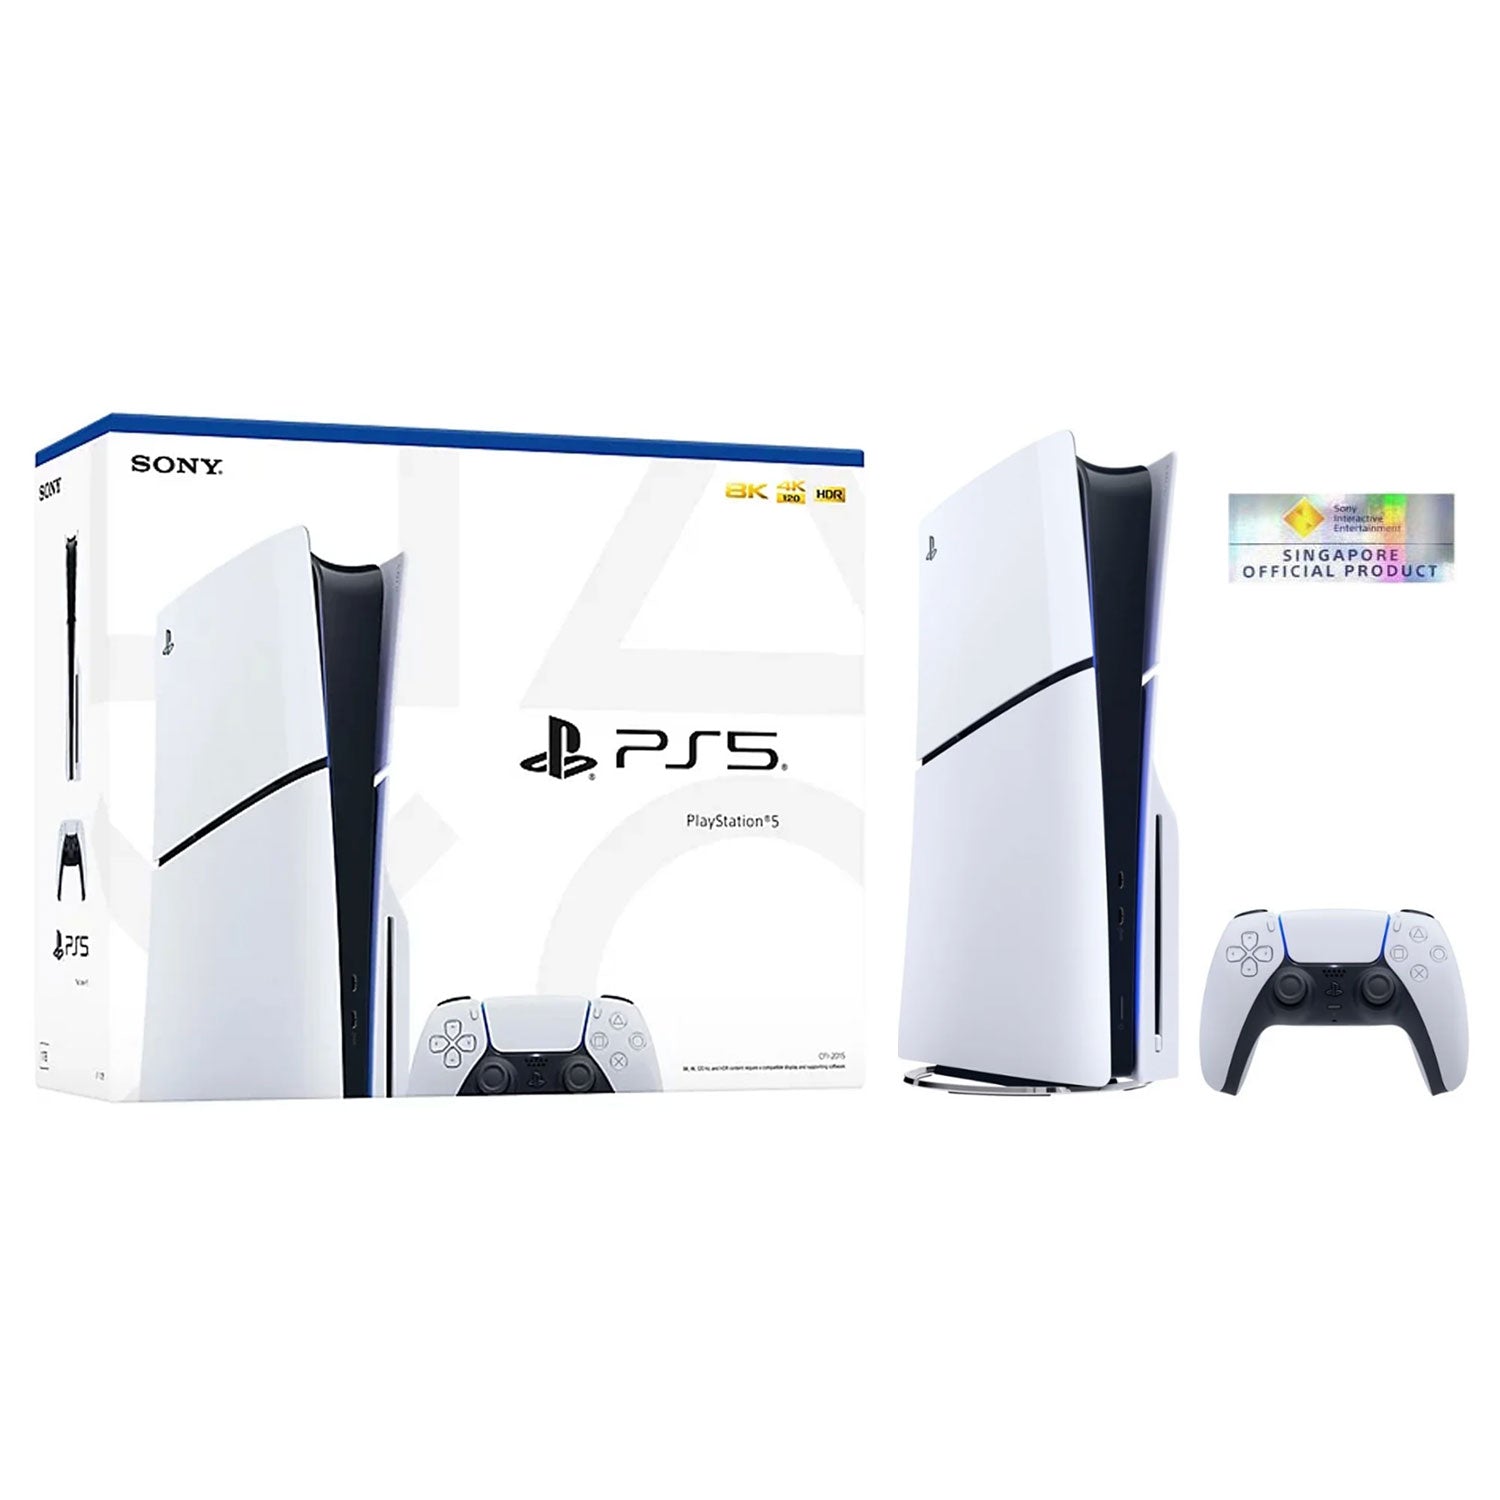 Sony PlayStation 5 Slim 1TB Disc Drive Console with 15 Months Warranty by Sony Singapore